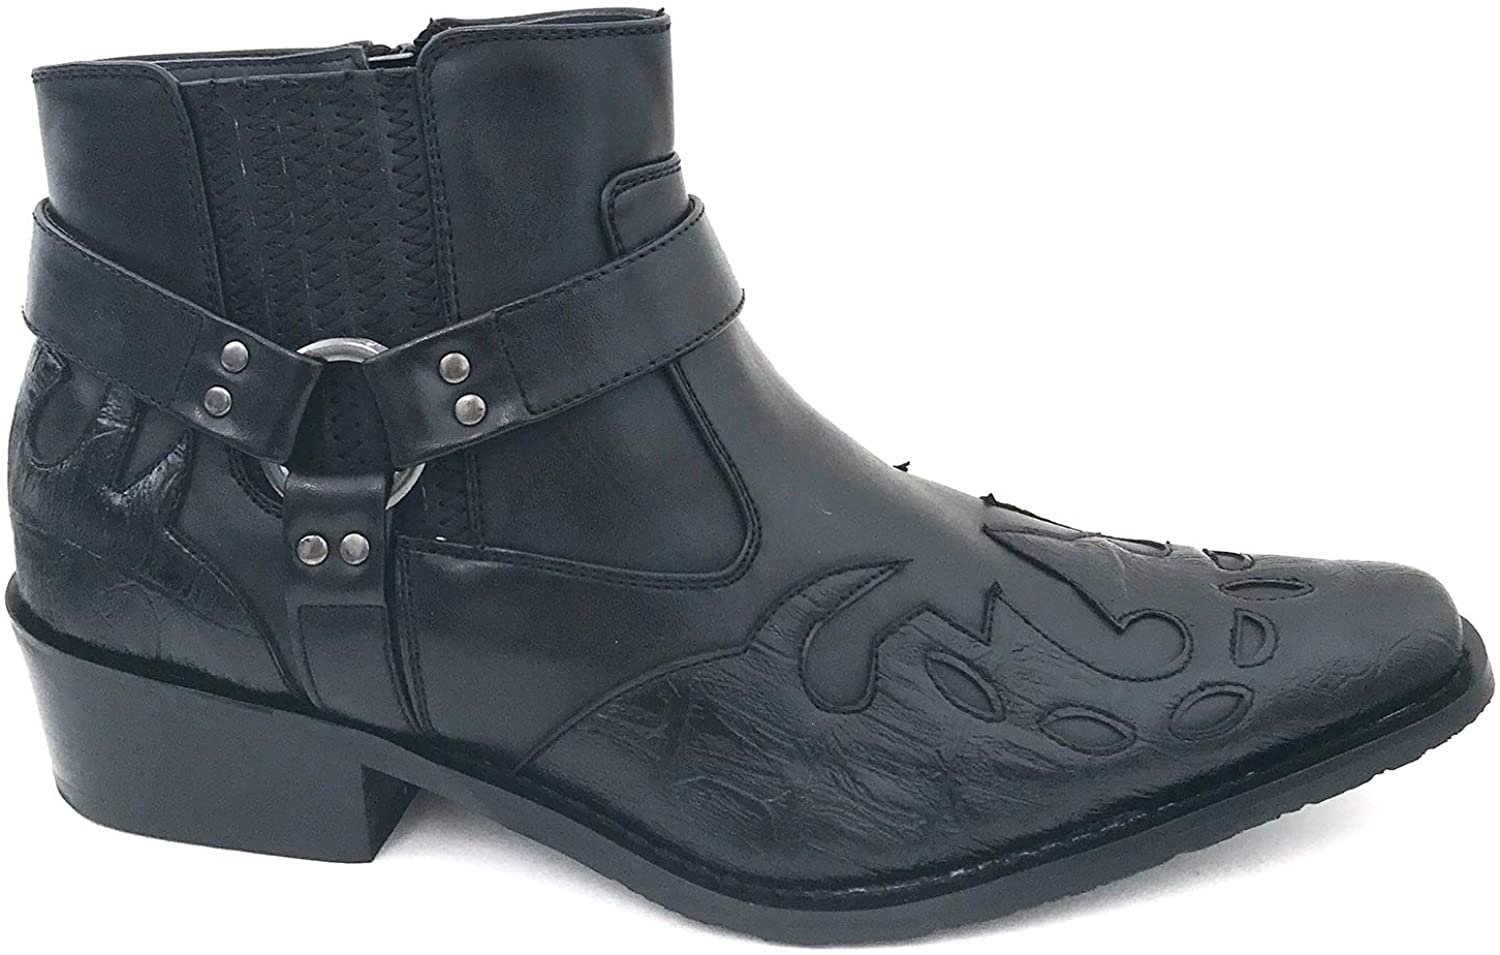 Men's Cowboy Boots Western Leather Lined Ankle Harness Strap Side Zipper Shoes - image 2 of 5